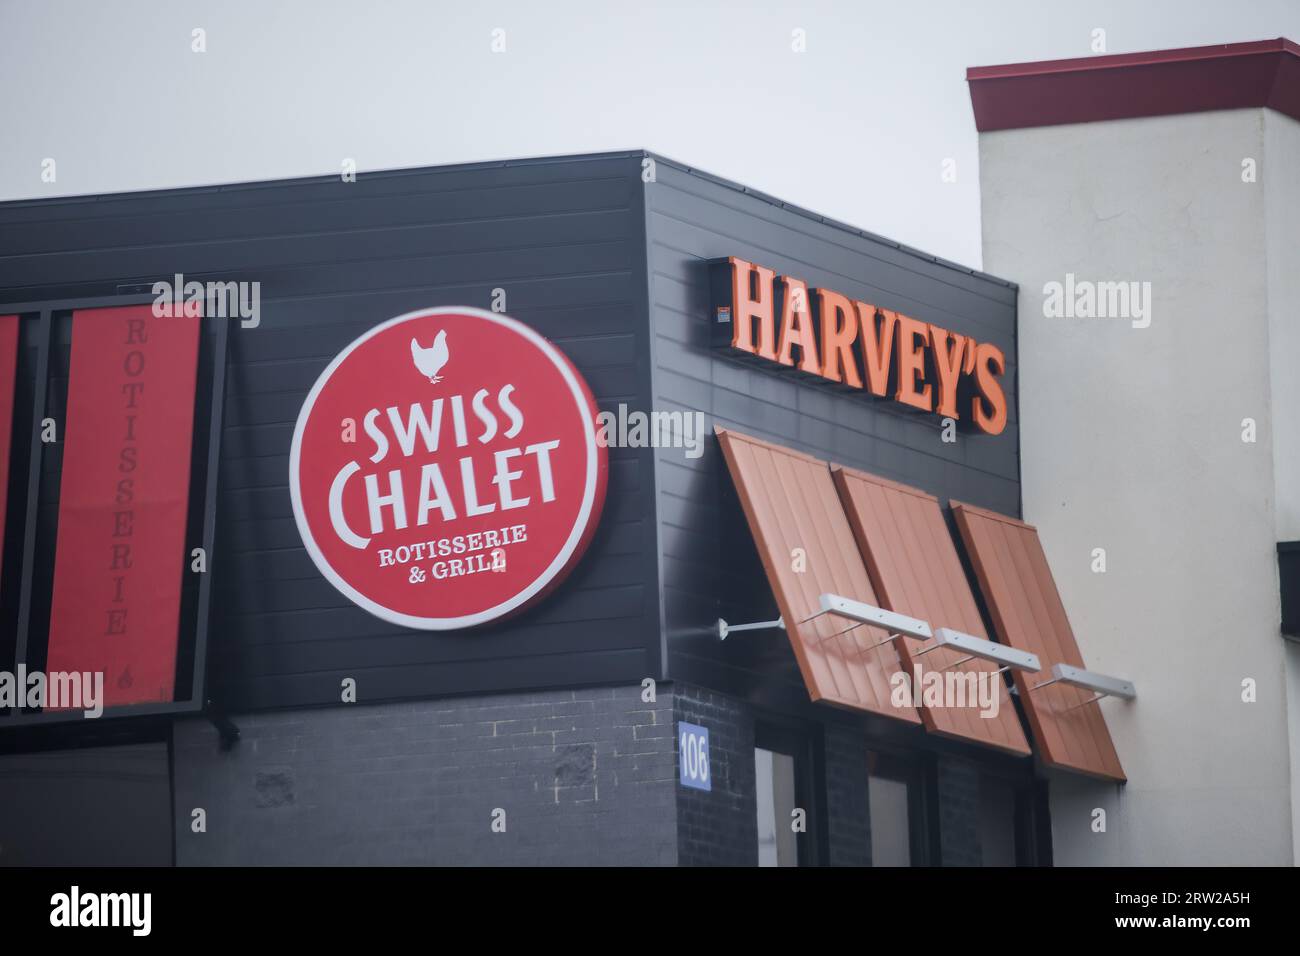 HARVEYS Restaurant and SWISS CHALET banner.  Canadian restaurant specialized in burgers, sandwiches, wraps, poutines, frozen drinks and more. Stock Photo